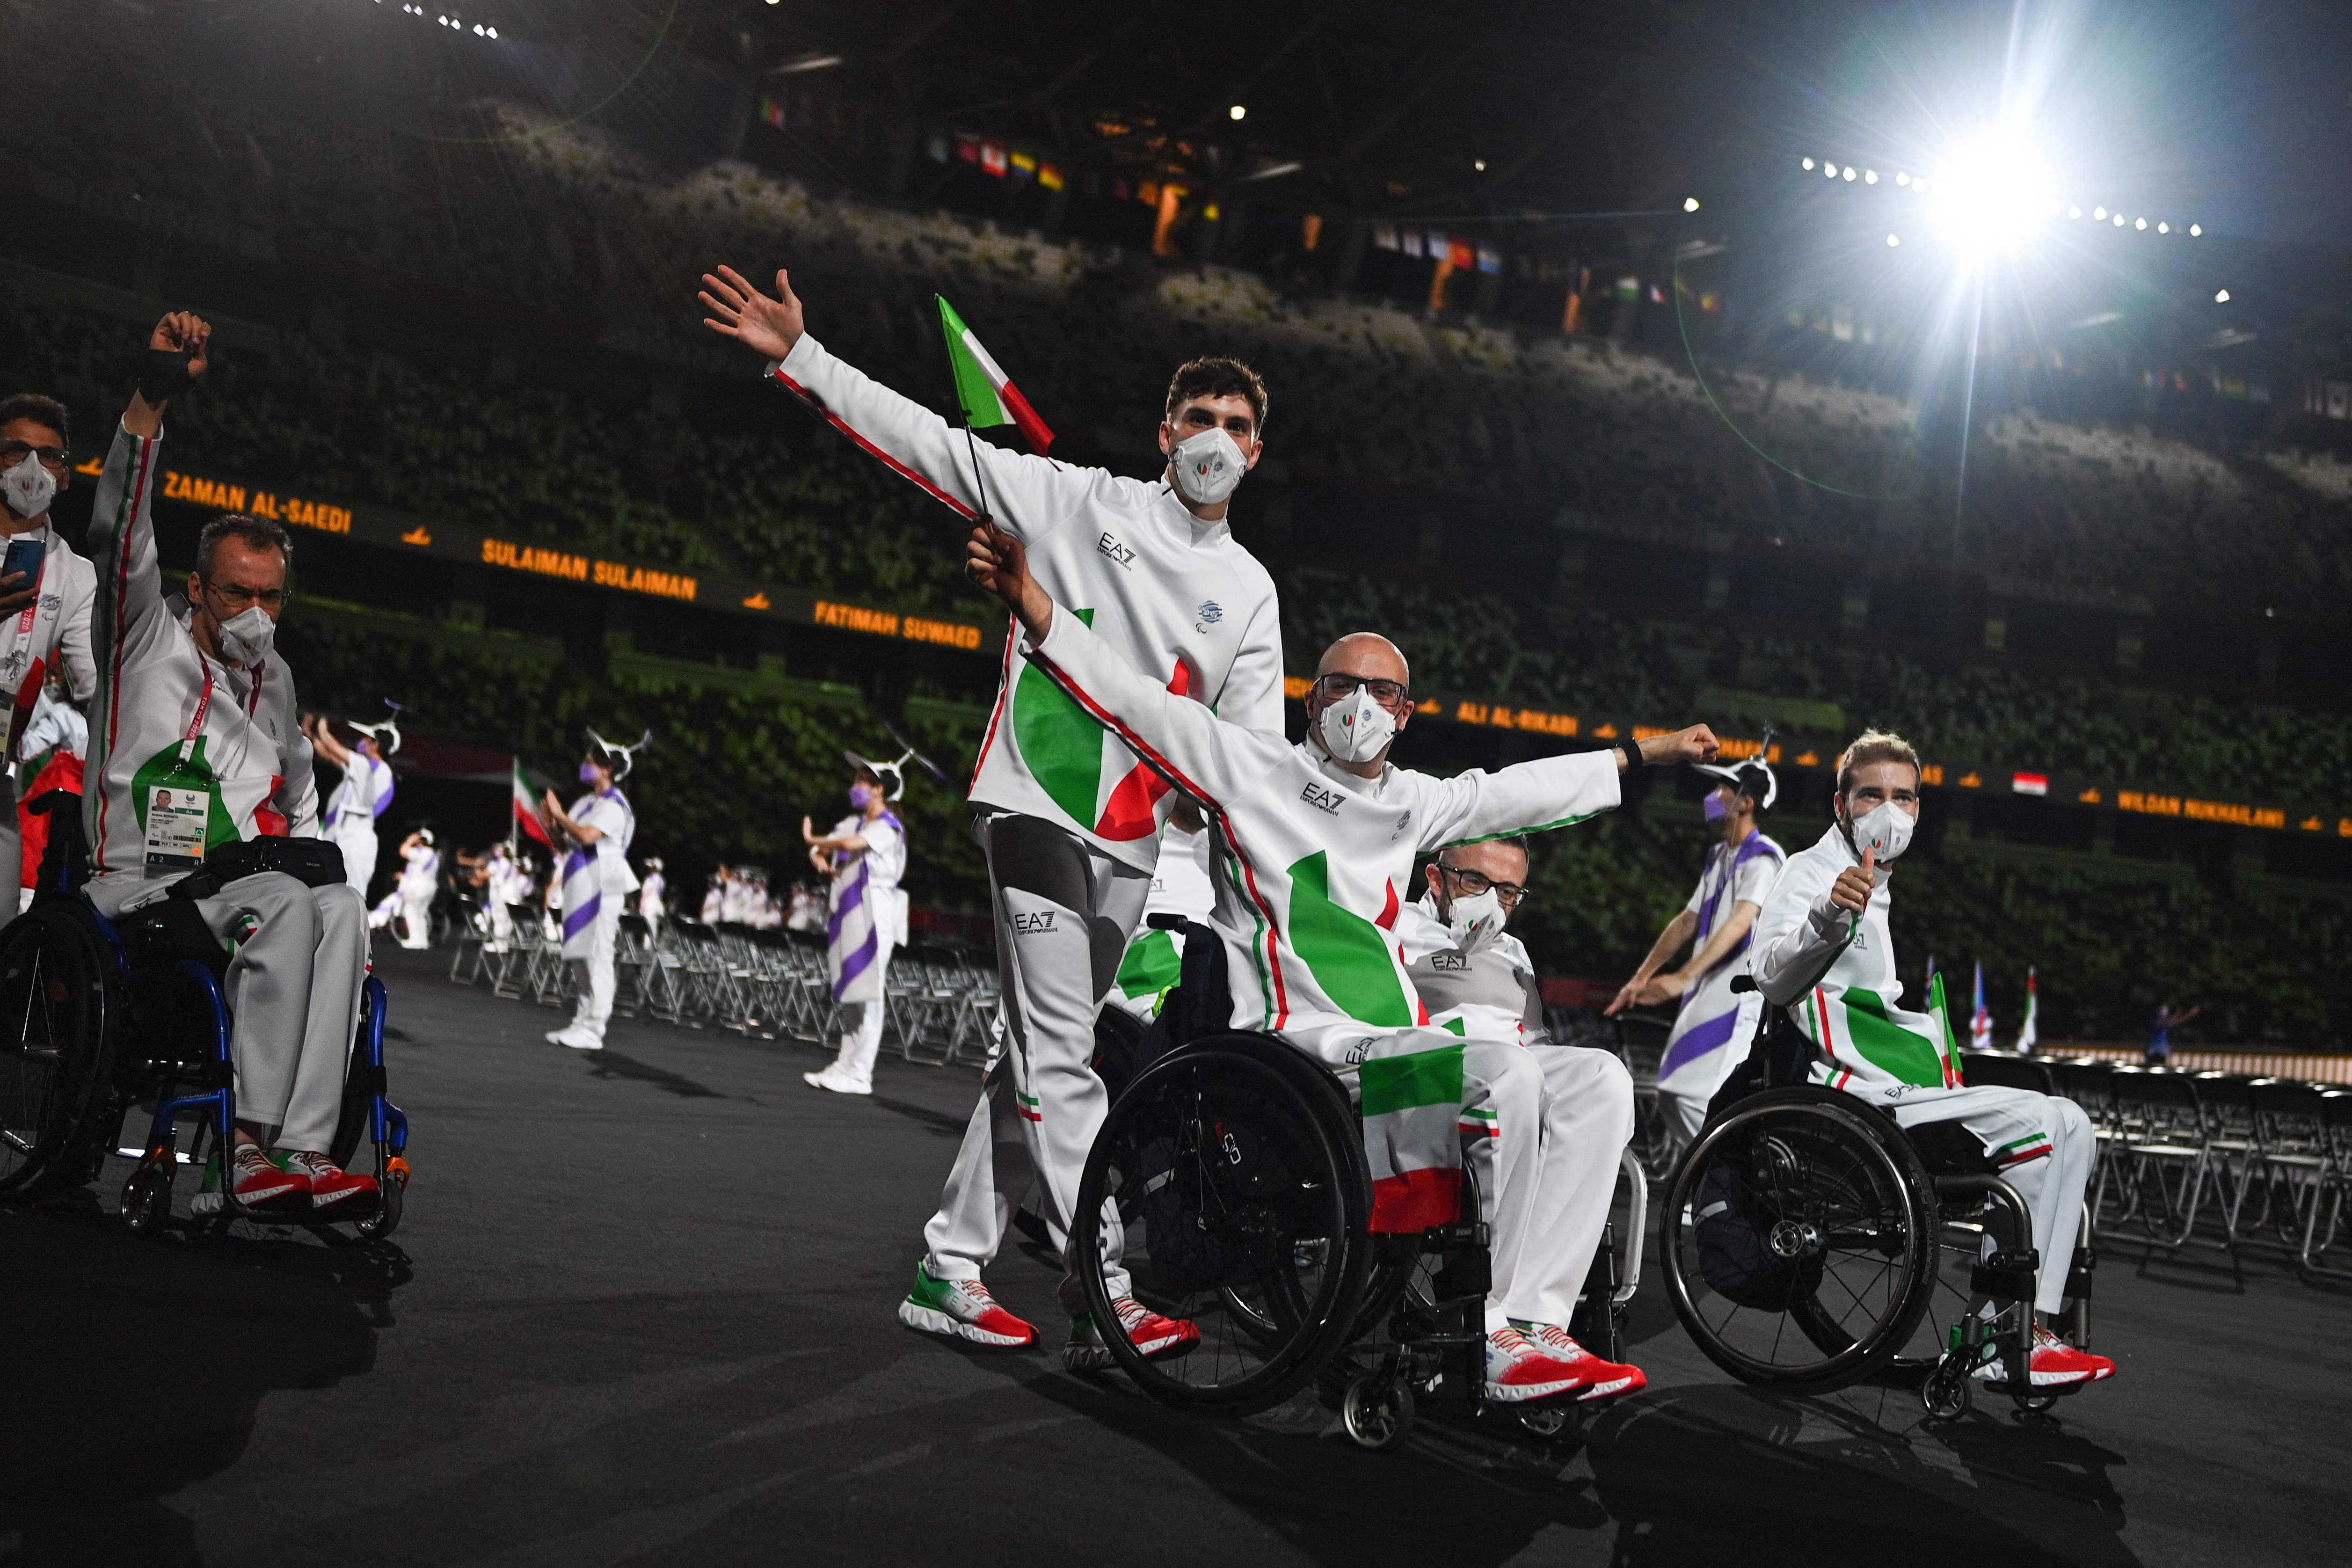 Teams arriving for the opening ceremony for the Tokyo 2020 Paralympic Games at the Olympic Stadium in Tokyo on 24 August